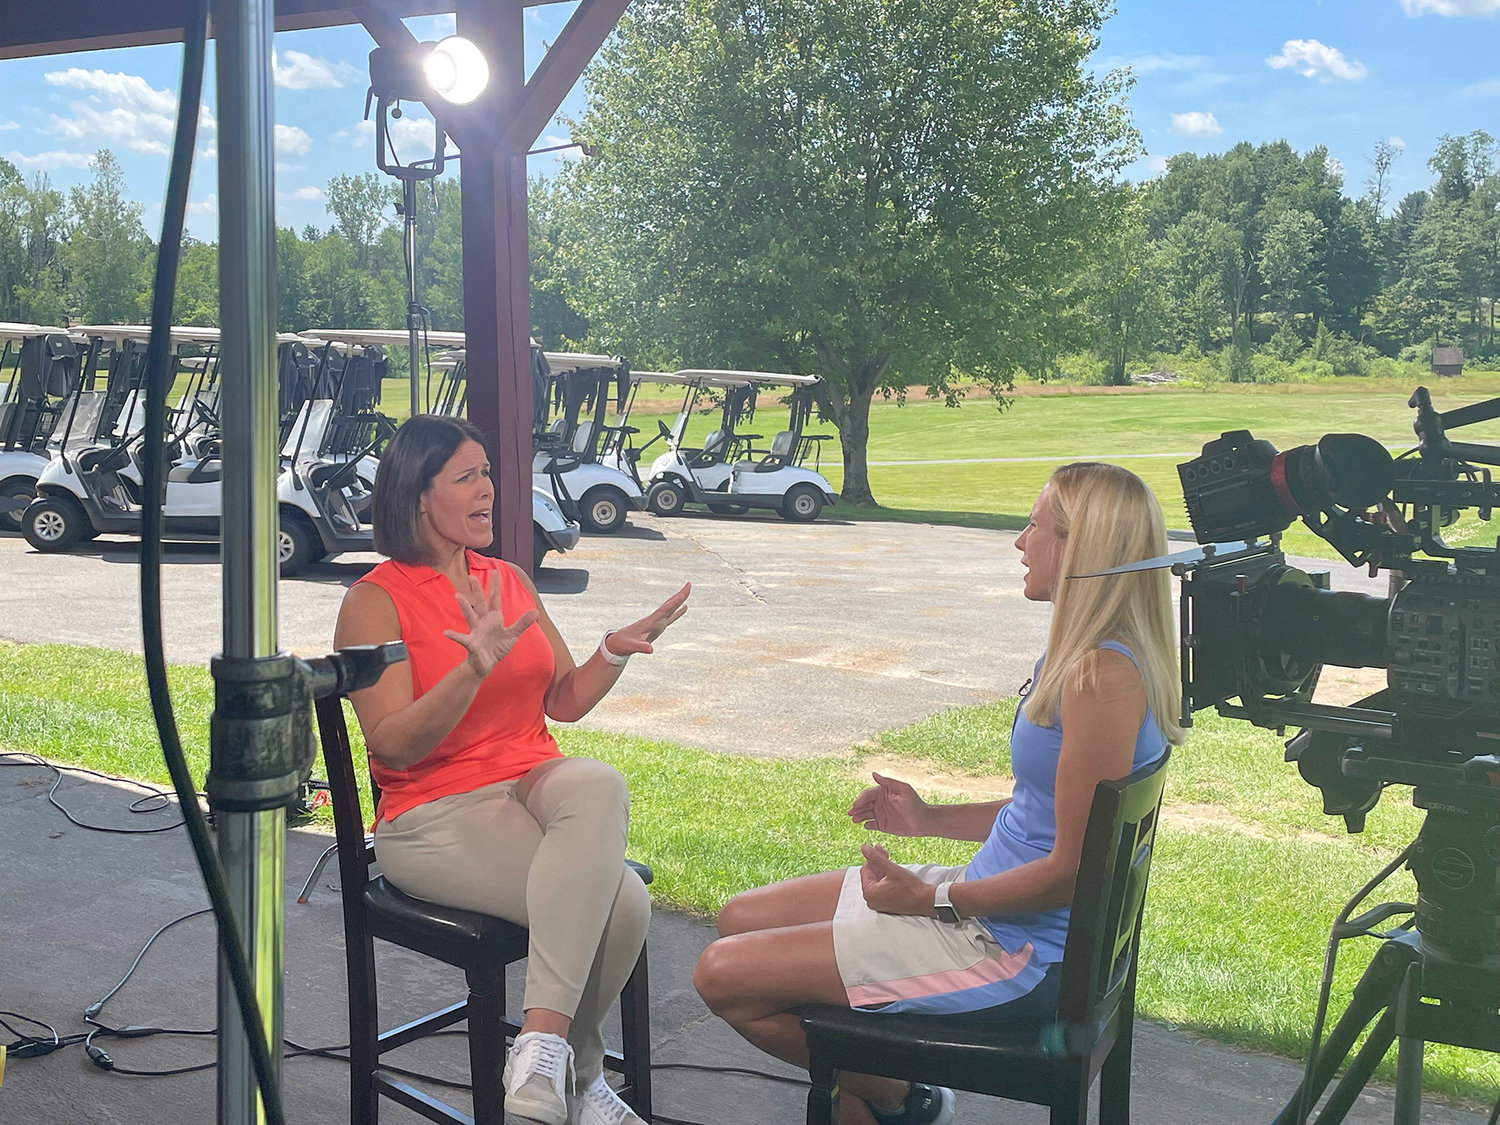 Rome’s Lauren Cupp, right, is interviewed by CBS Saturday Morning co-host Dana Jacobson on June 30 at Rome Country Club for a speedgolf feature. Cupp won the Alabama Speedgolf Open last month to solidify her No. 1 world ranking in speedgolf. The speedgolf piece will run this Saturday. The show runs from 9-11 a.m.